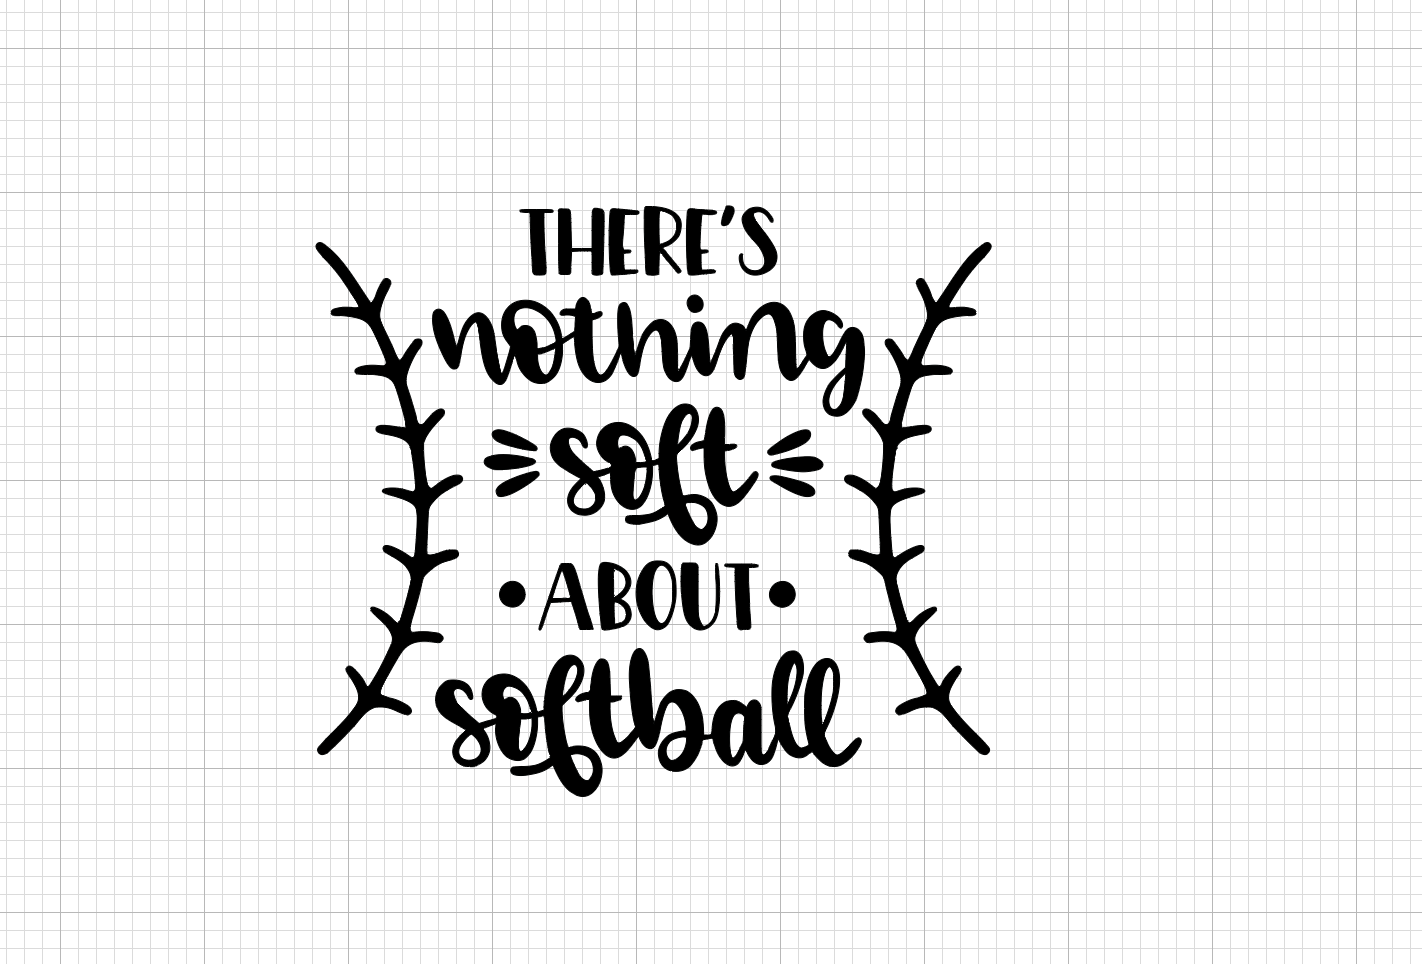 Nothing Soft about Softball Vinyl Add-on